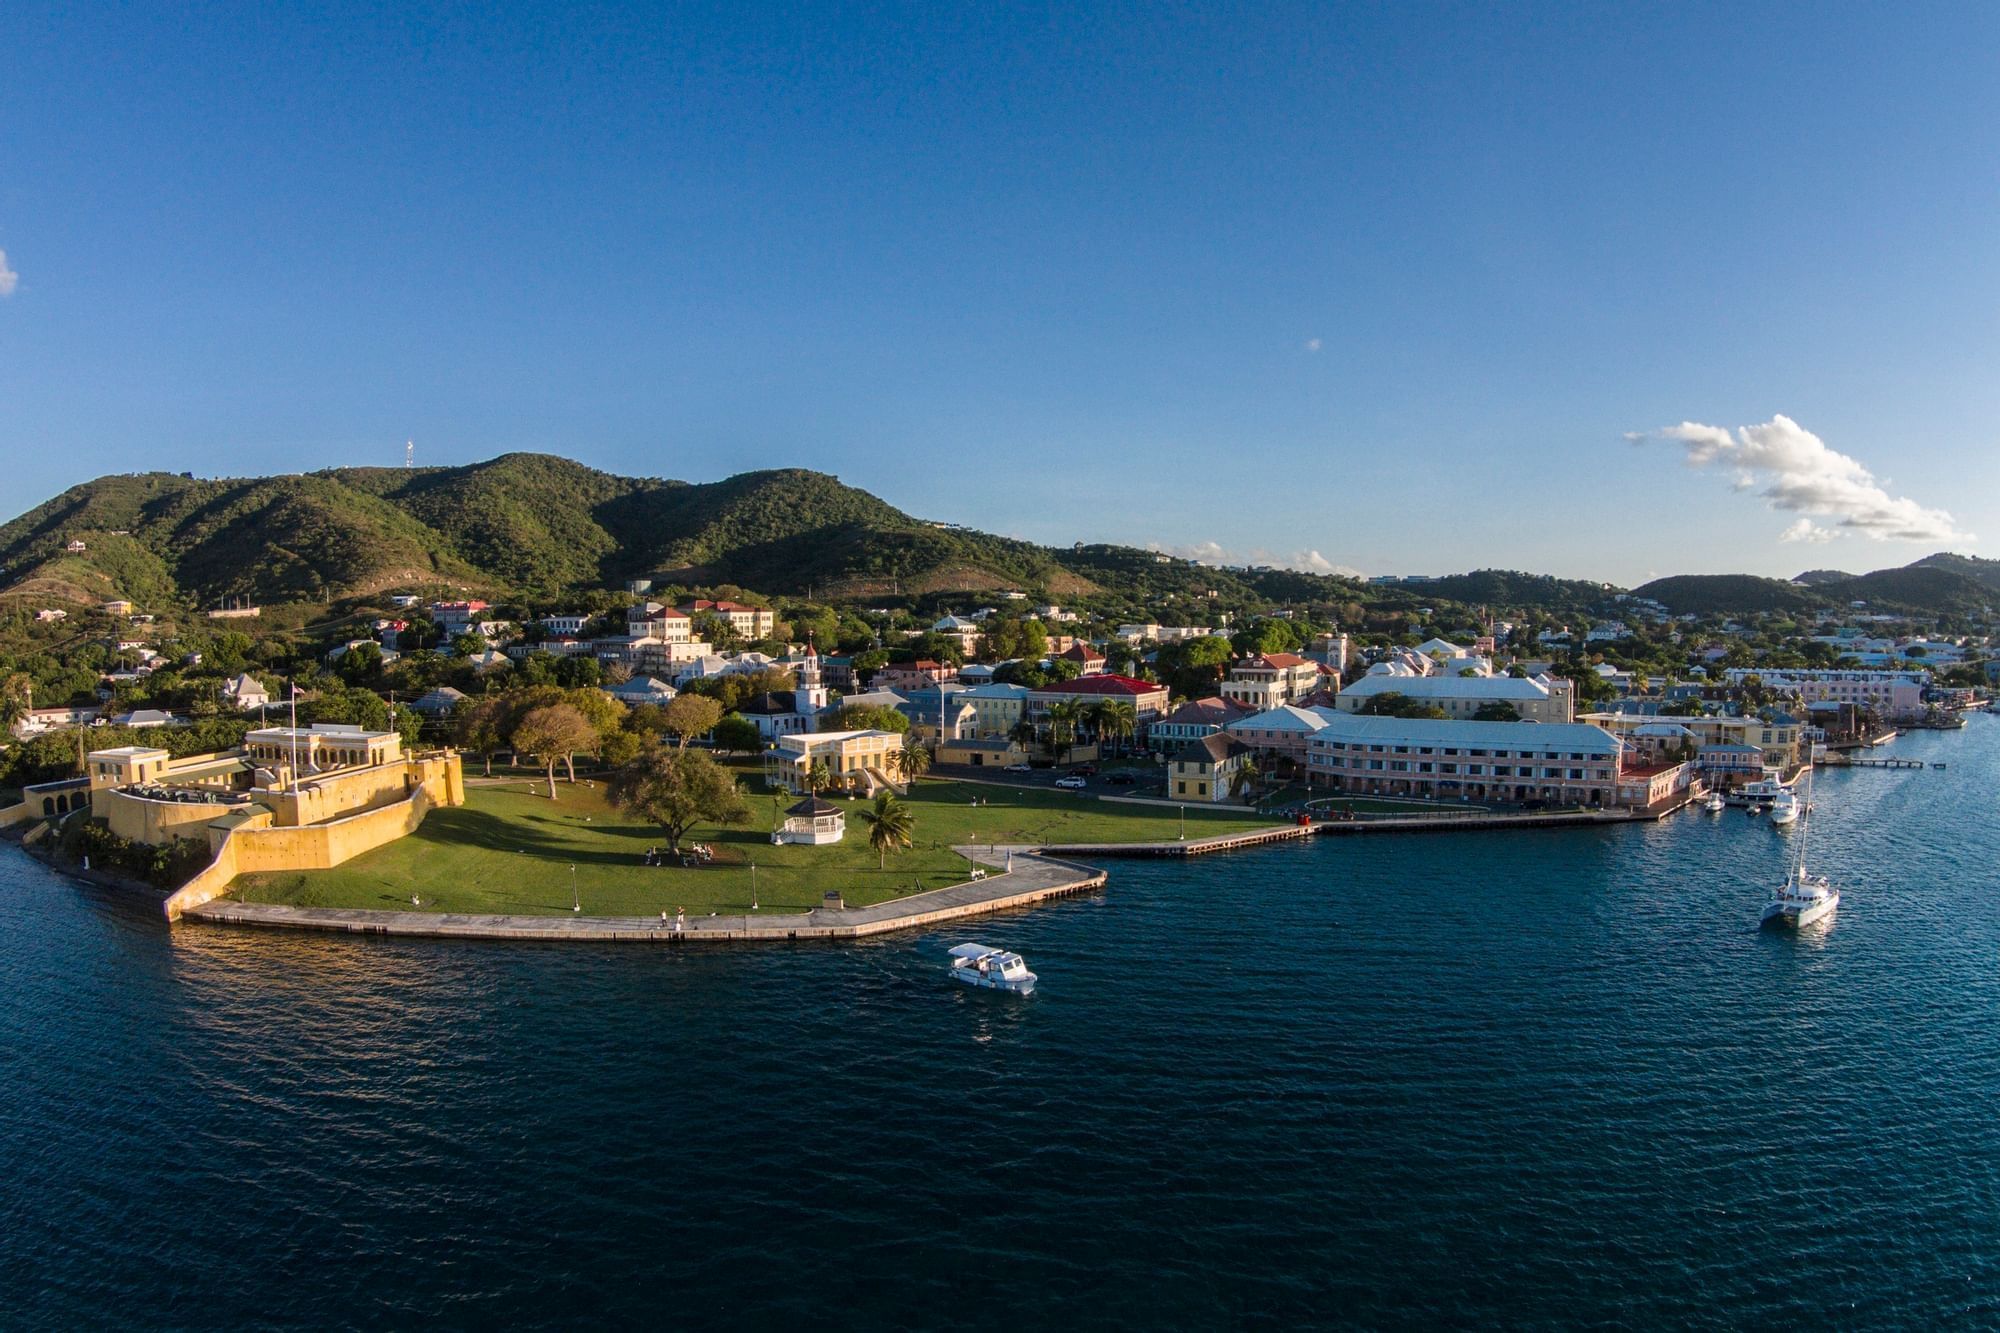 Christiansted Historic Town & the waterfront near The Buccaneer